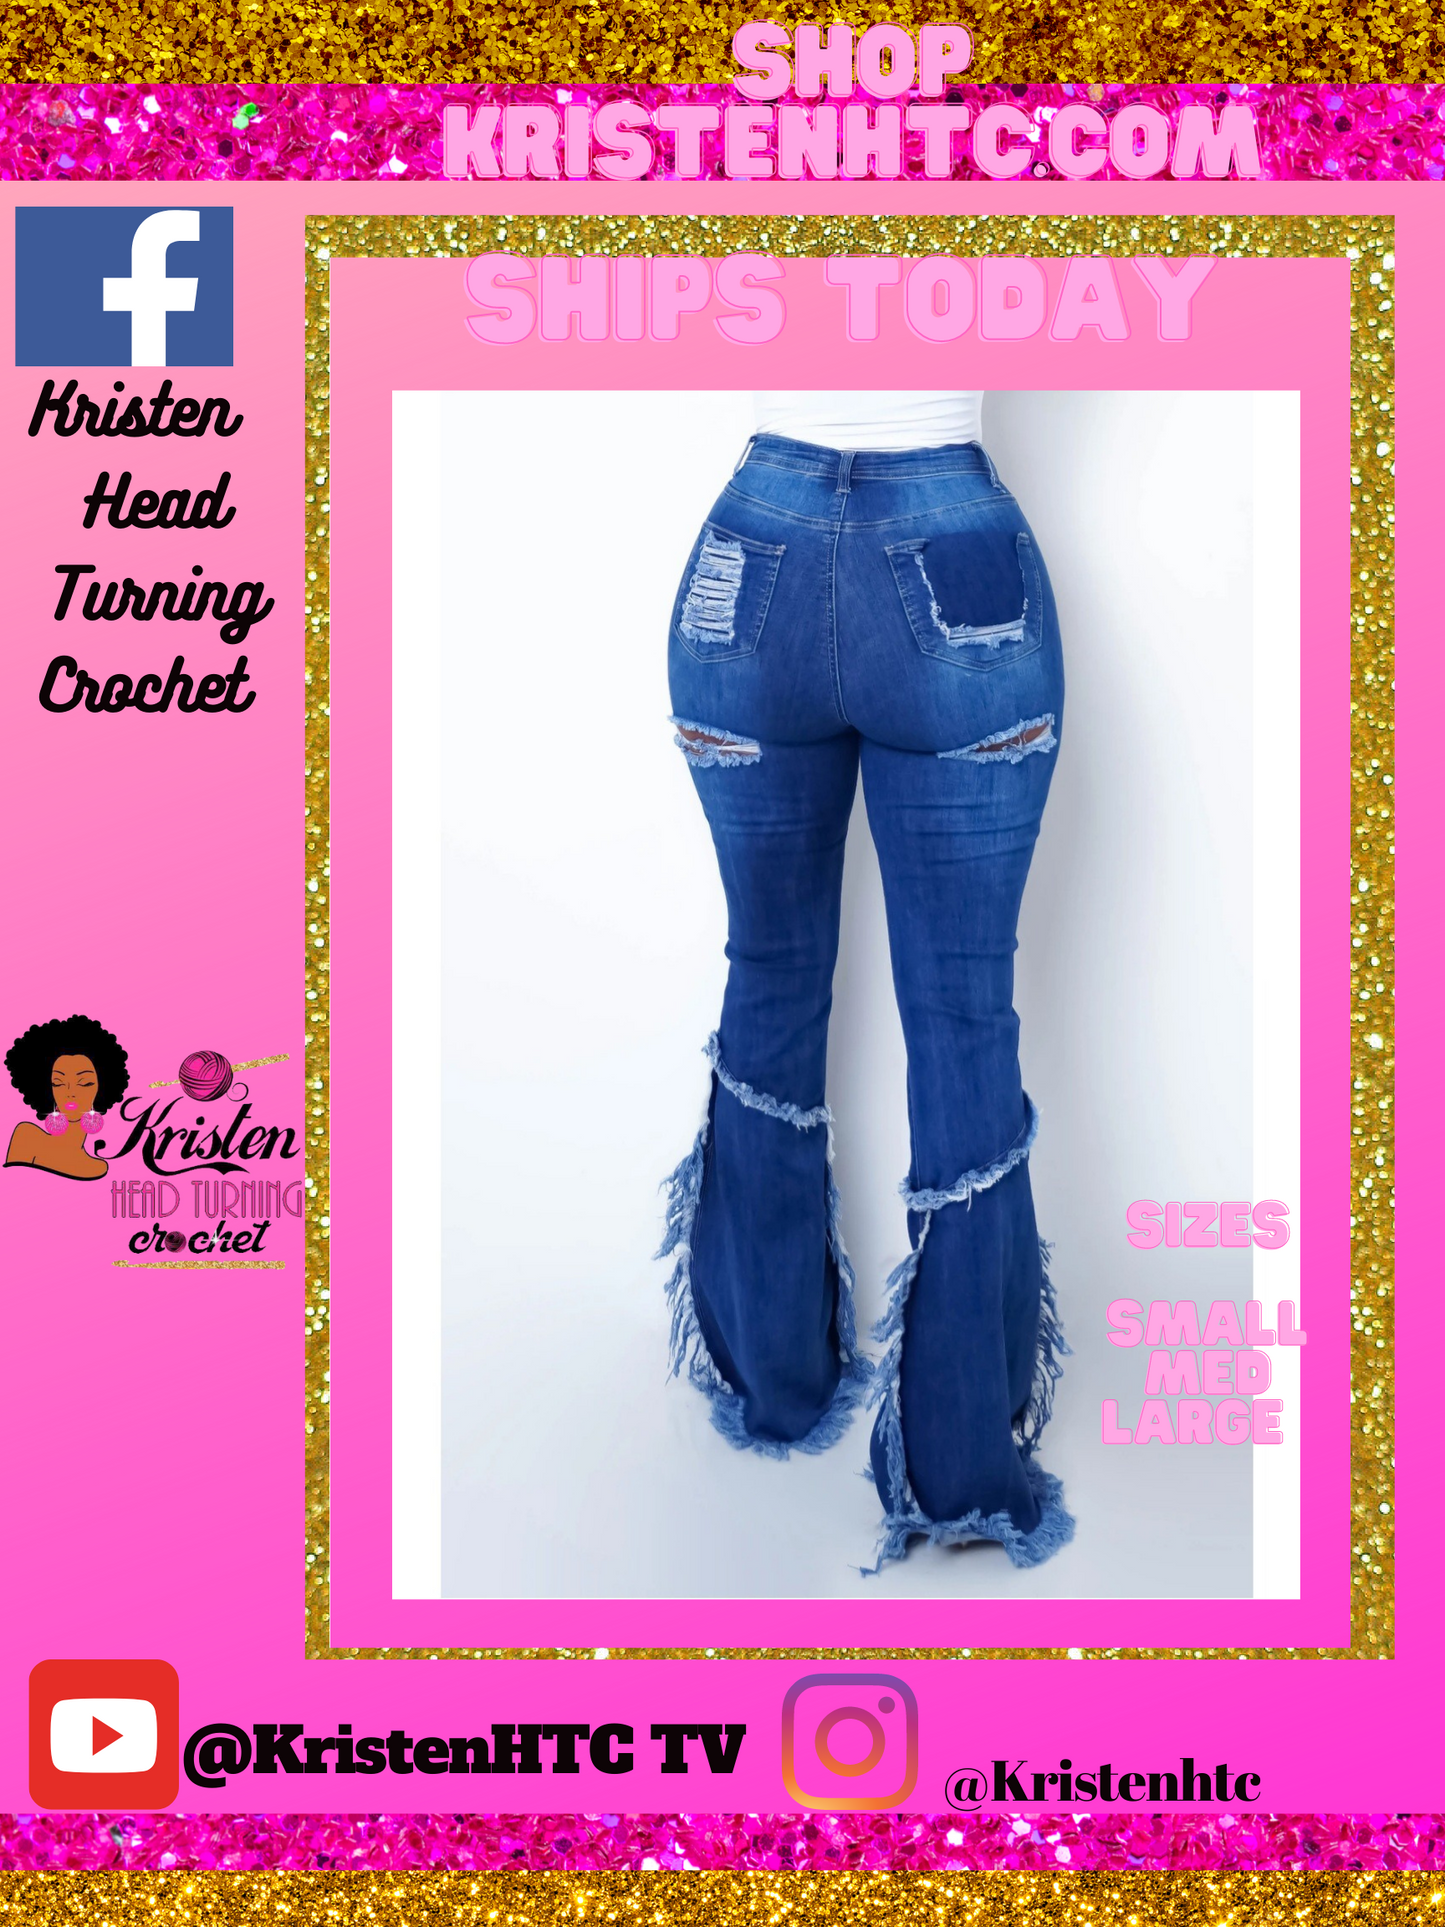 BELL BOTTOM CUT OUT BLUE JEANS